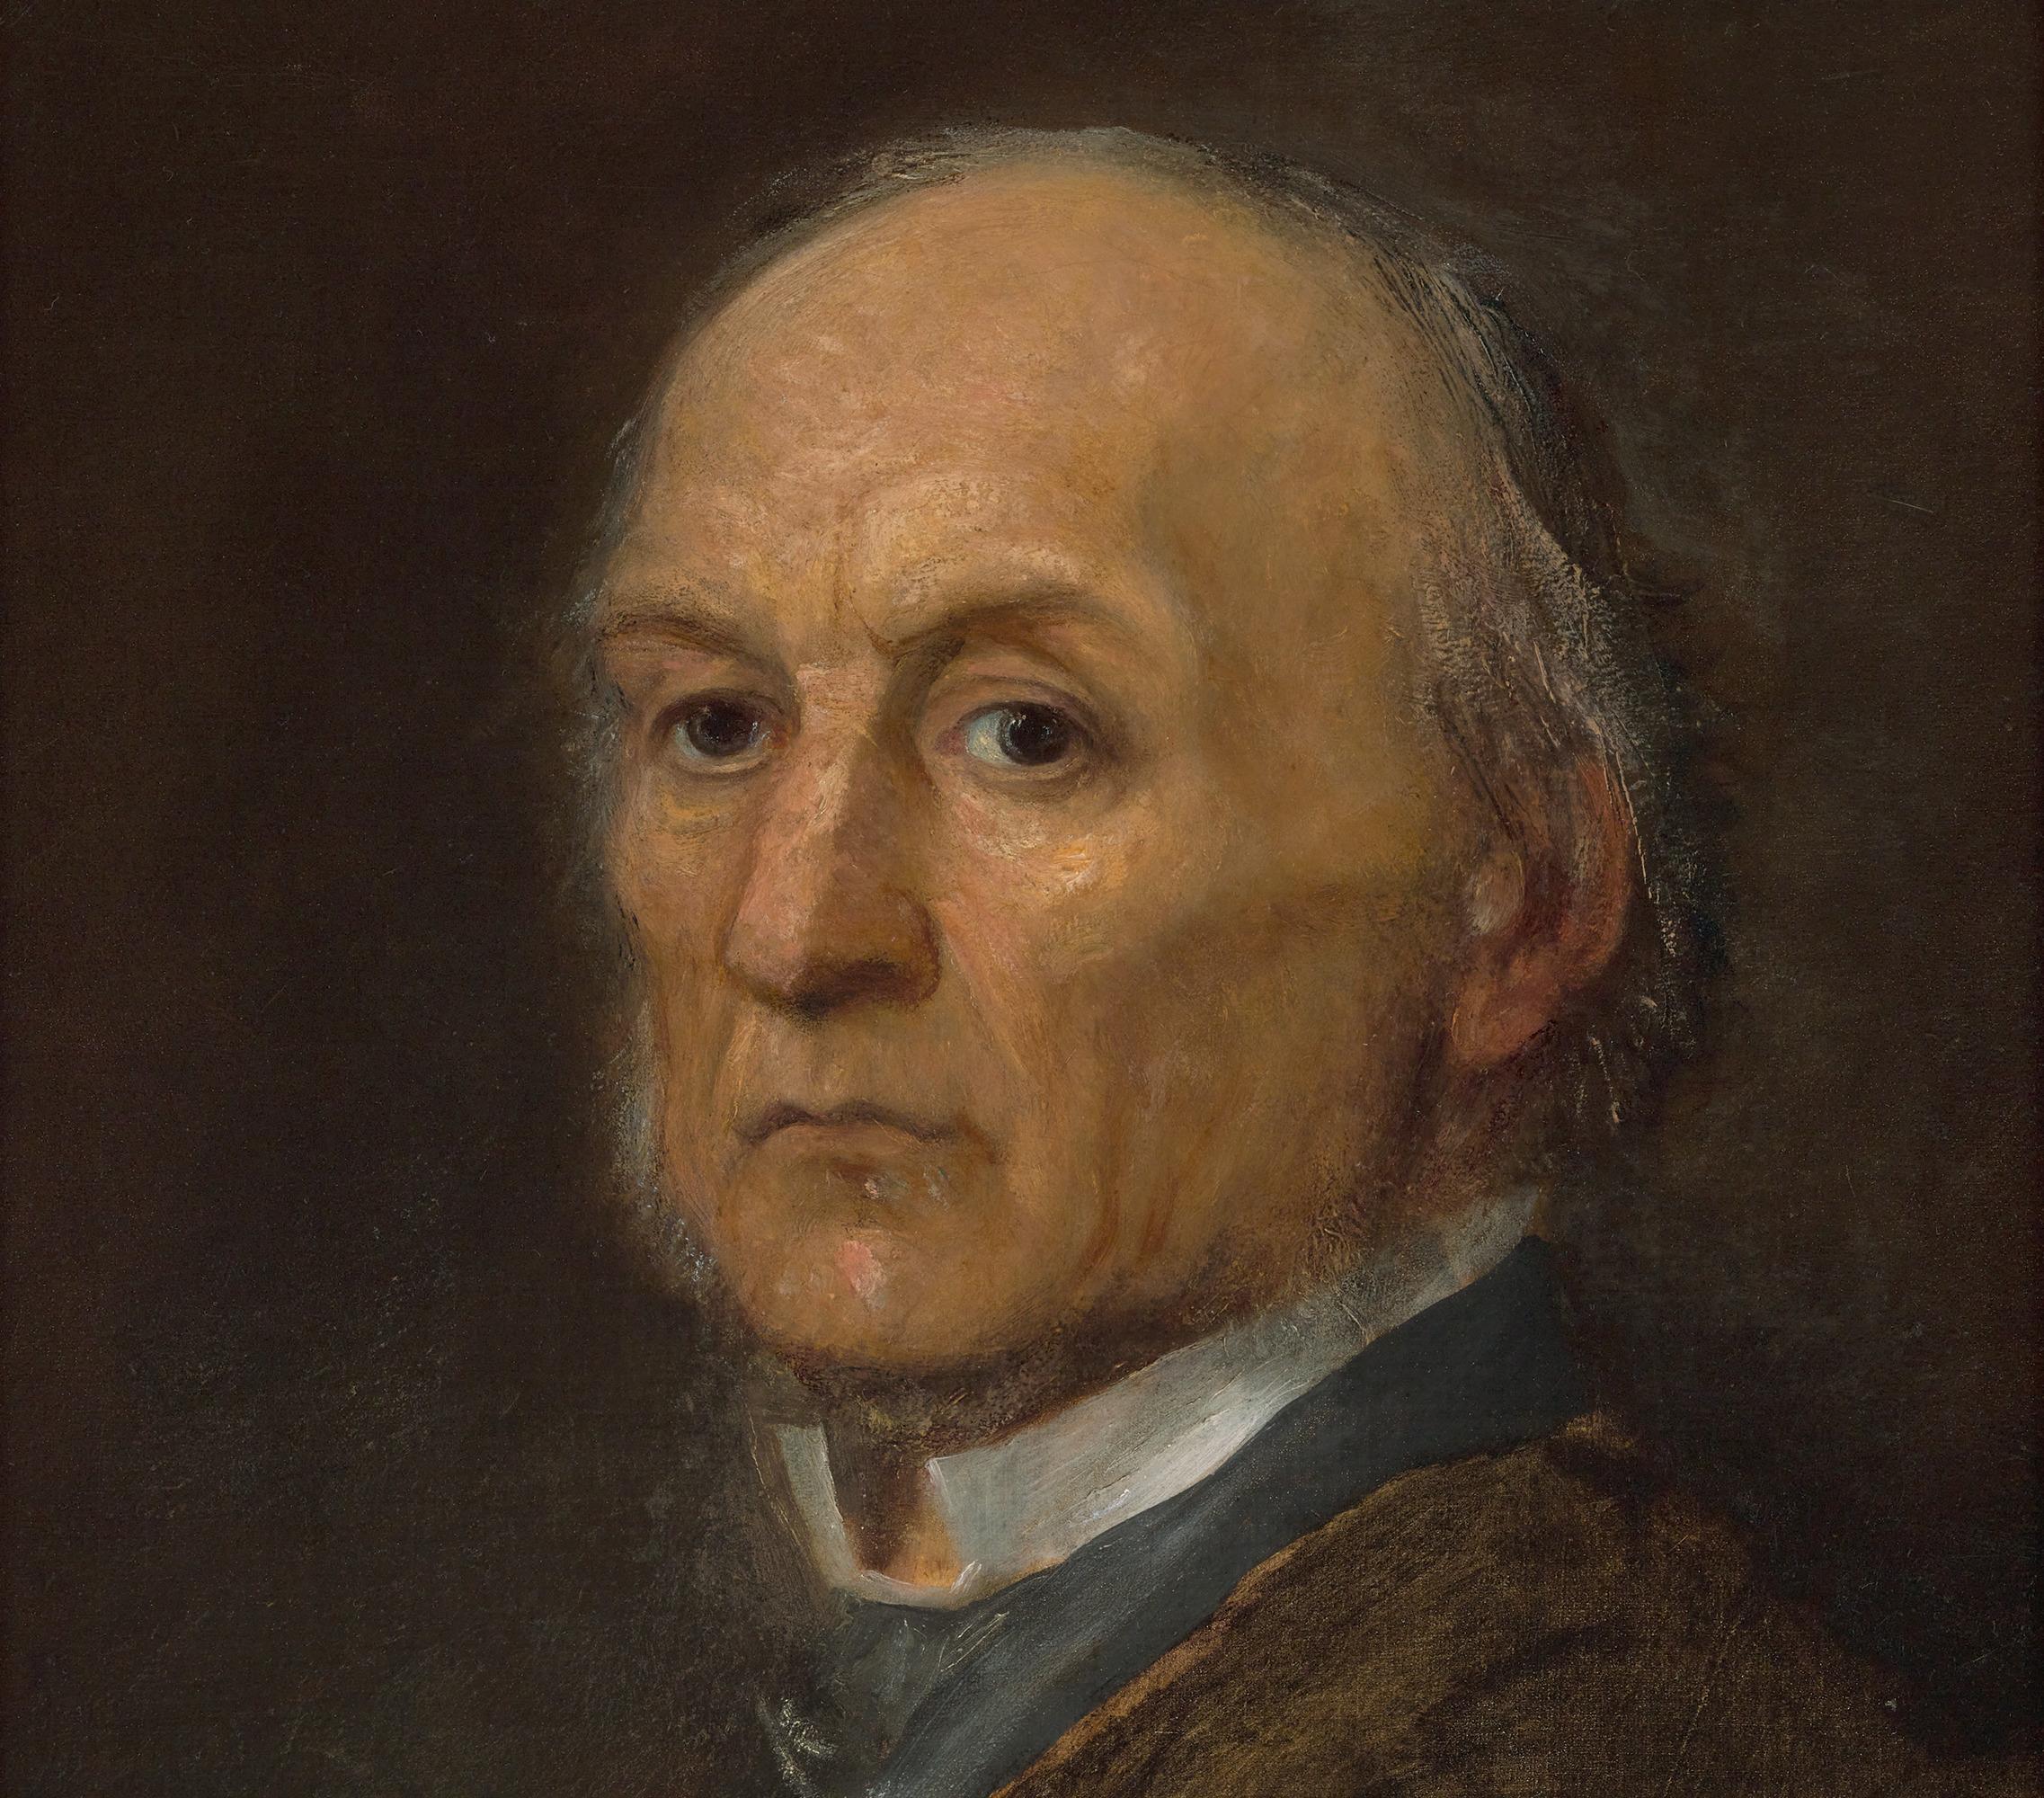 George Frederic Watts
1817-1904  British

Portrait of Prime Minister William Ewart Gladstone

Oil on canvas

This exceptional portrait captures the stately likeness of the famed “Grand Old Man” of British politics, Prime Minister William Ewart